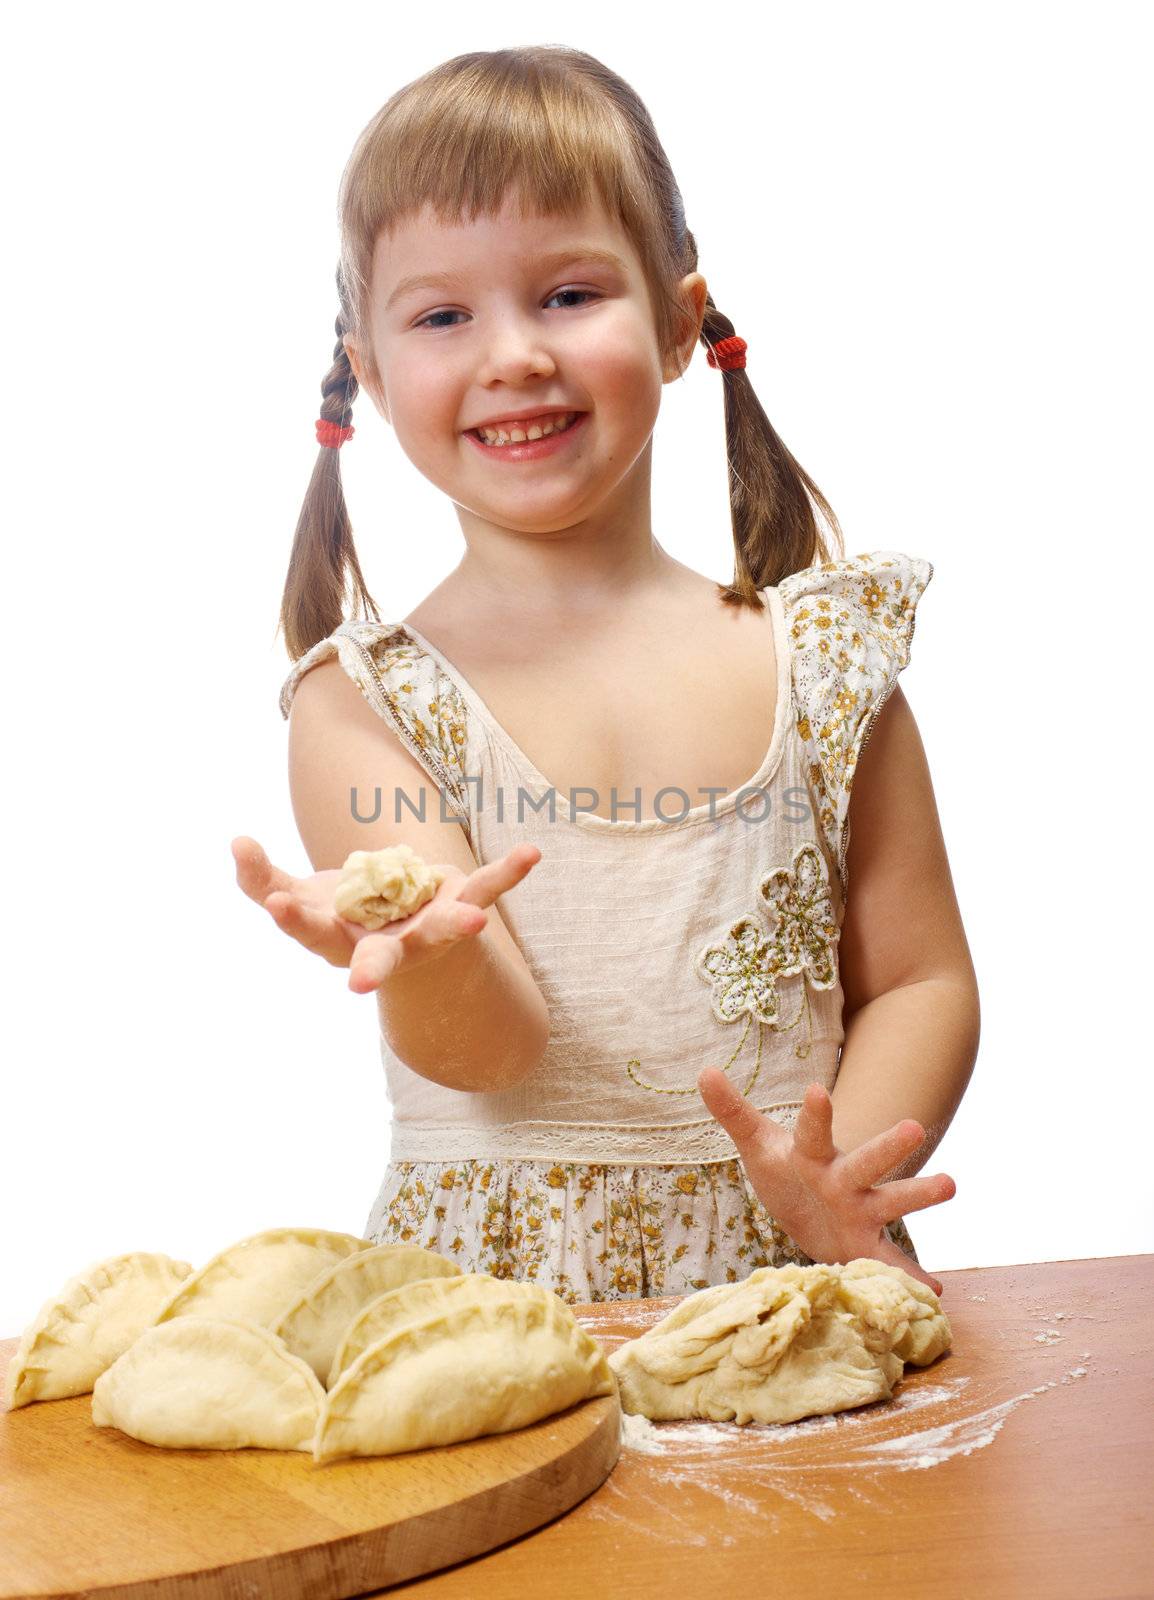 Smiling little girl kneading dough at kitchen with baking a pie. isolated on white